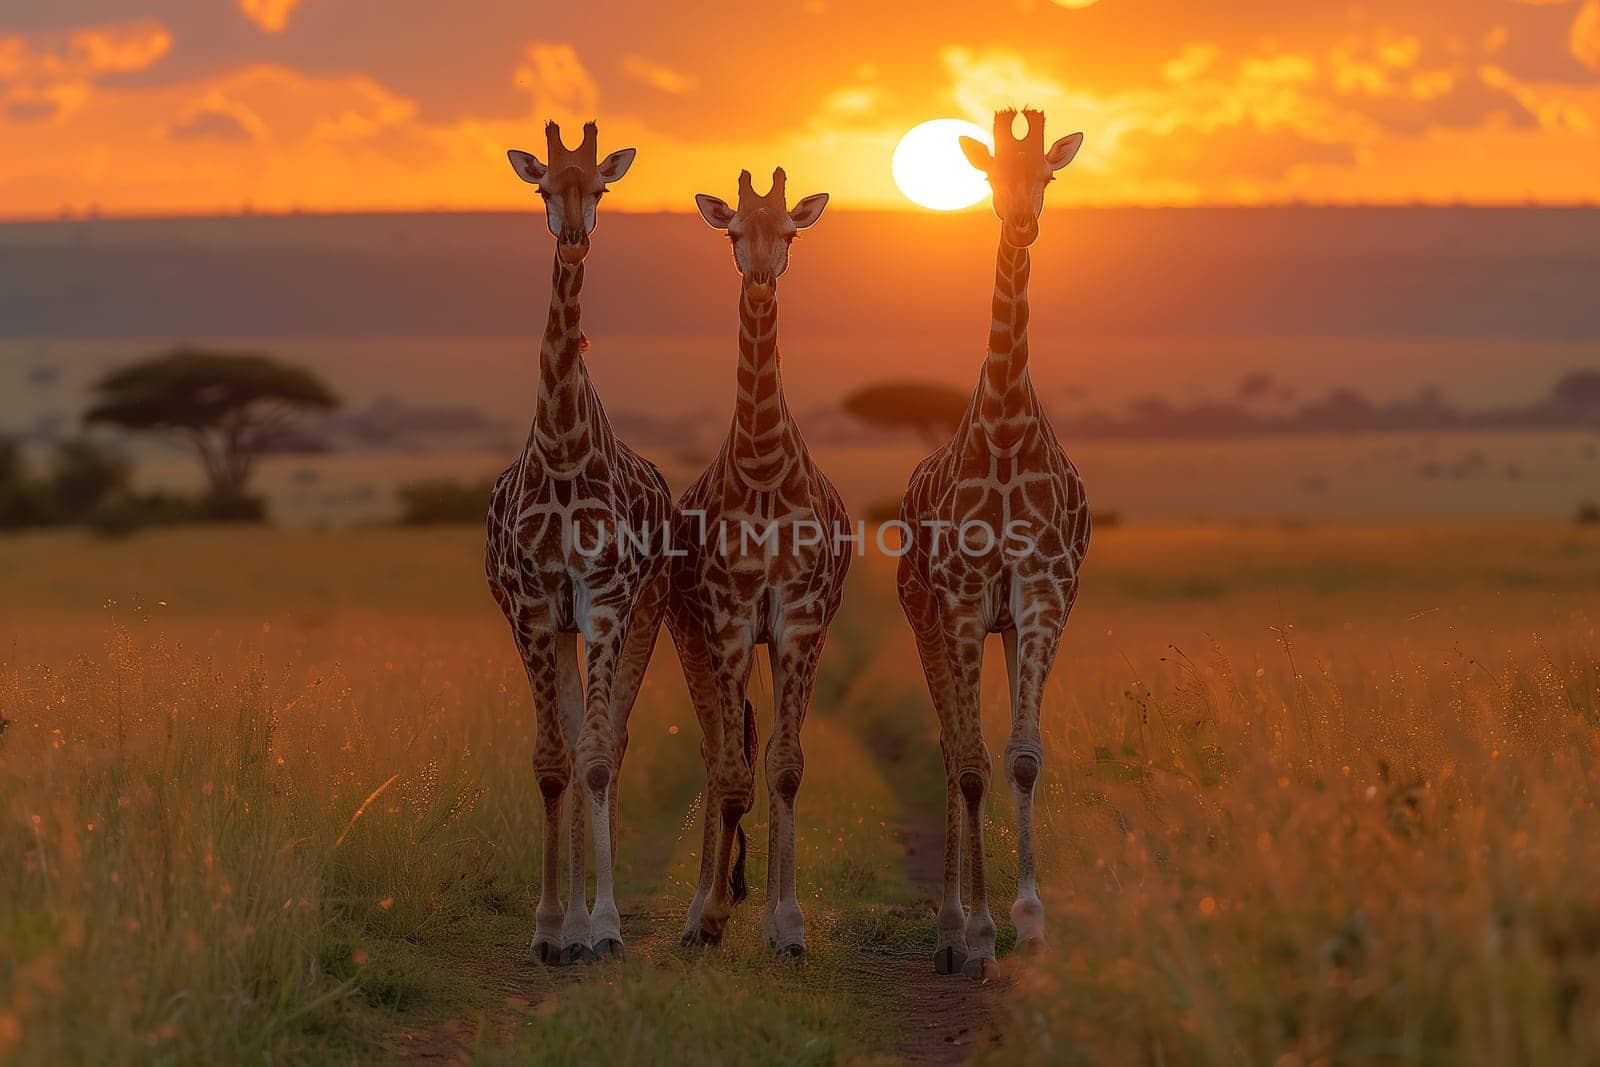 Three giraffes in a field at sunset, under a colorful sky by richwolf